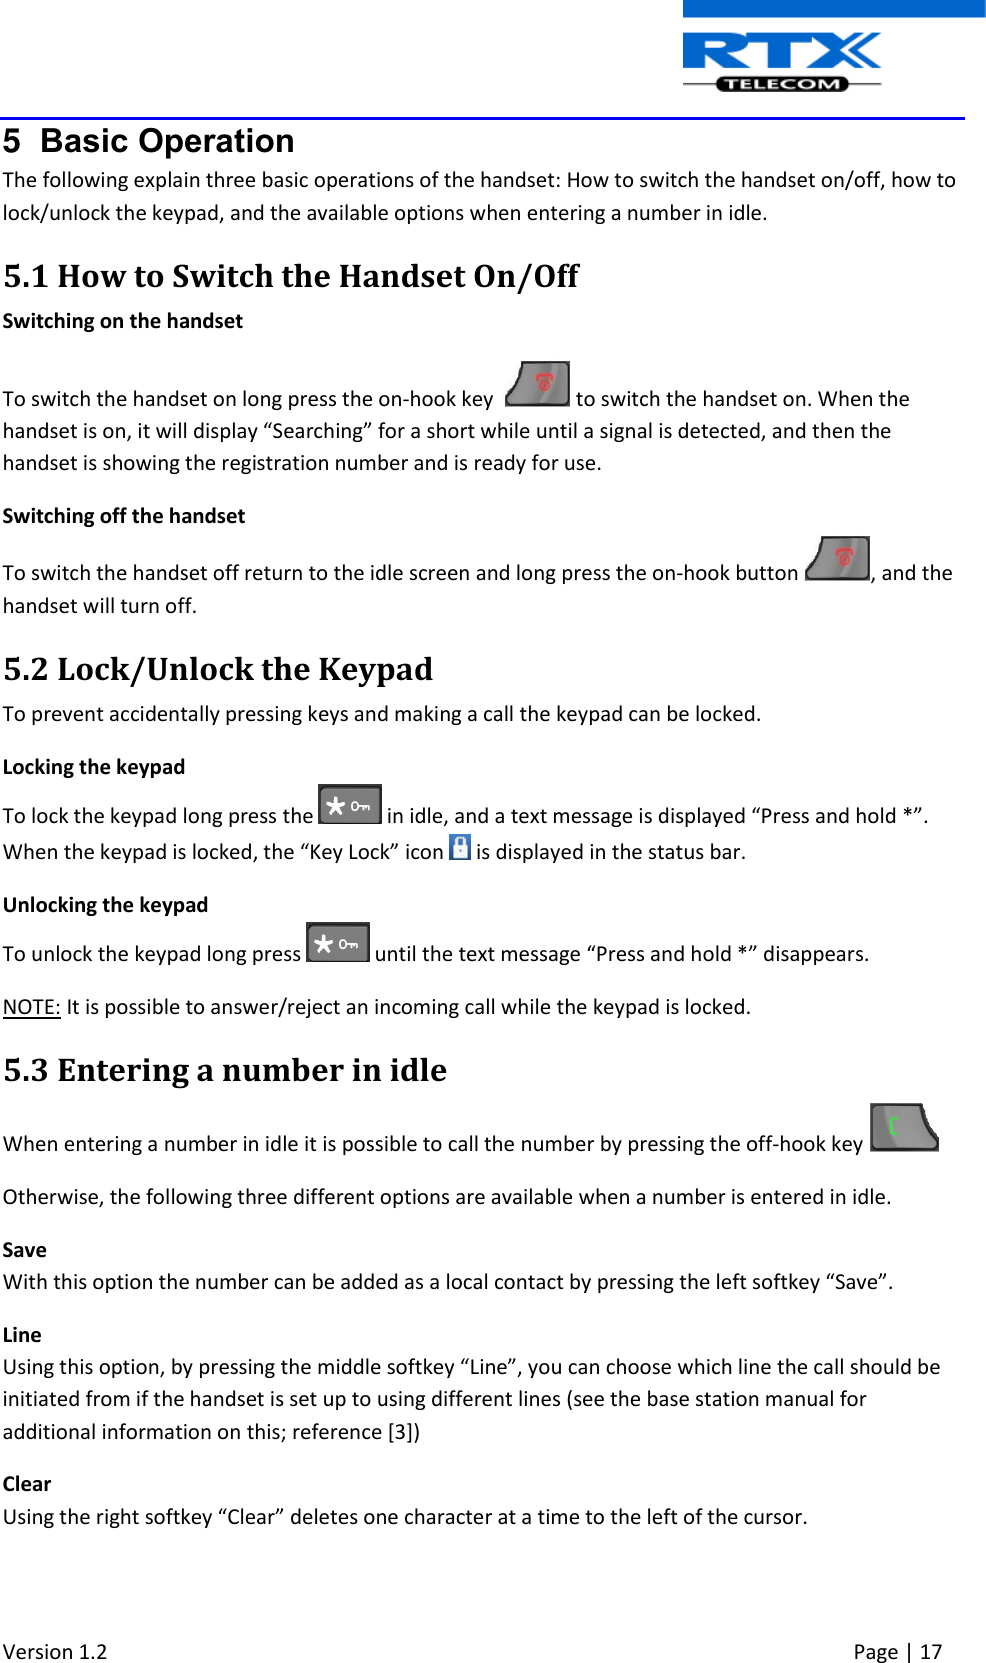  Version 1.2     Page | 17   5  Basic Operation The following explain three basic operations of the handset: How to switch the handset on/off, how to lock/unlock the keypad, and the available options when entering a number in idle. 5.1 How to Switch the Handset On/Off Switching on the handset To switch the handset on long press the on-hook key    to switch the handset on. When the handset is on, it will display “Searching” for a short while until a signal is detected, and then the handset is showing the registration number and is ready for use. Switching off the handset To switch the handset off return to the idle screen and long press the on-hook button  , and the handset will turn off. 5.2 Lock/Unlock the Keypad To prevent accidentally pressing keys and making a call the keypad can be locked. Locking the keypad To lock the keypad long press the   in idle, and a text message is displayed “Press and hold *”. When the keypad is locked, the “Key Lock” icon   is displayed in the status bar. Unlocking the keypad To unlock the keypad long press   until the text message “Press and hold *” disappears. NOTE: It is possible to answer/reject an incoming call while the keypad is locked.  5.3 Entering a number in idle When entering a number in idle it is possible to call the number by pressing the off-hook key   Otherwise, the following three different options are available when a number is entered in idle. Save With this option the number can be added as a local contact by pressing the left softkey “Save”. Line Using this option, by pressing the middle softkey “Line”, you can choose which line the call should be initiated from if the handset is set up to using different lines (see the base station manual for additional information on this; reference [3]) Clear Using the right softkey “Clear” deletes one character at a time to the left of the cursor.    